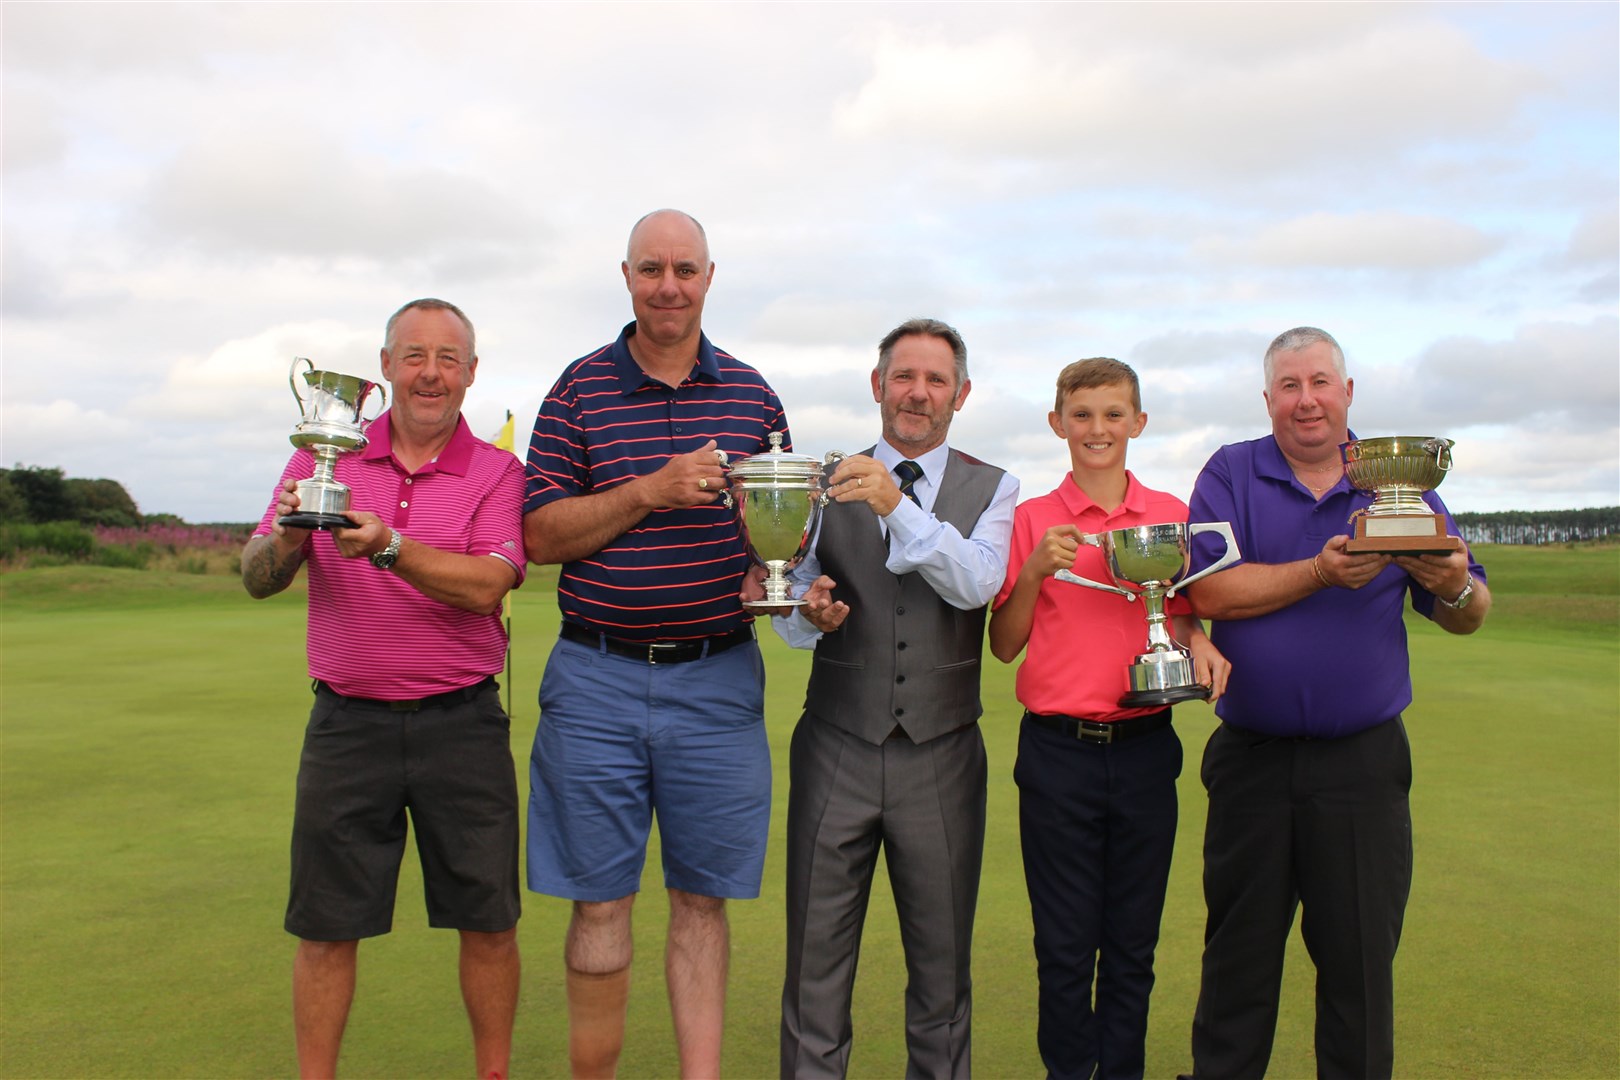 John Bell (Sirling Cup), Ross Moir (McVitie and Price Cup), Michael Toal (Brookes Cup) and Kenny Hearton (Munro Rose Bowl) were all winners at Tain.